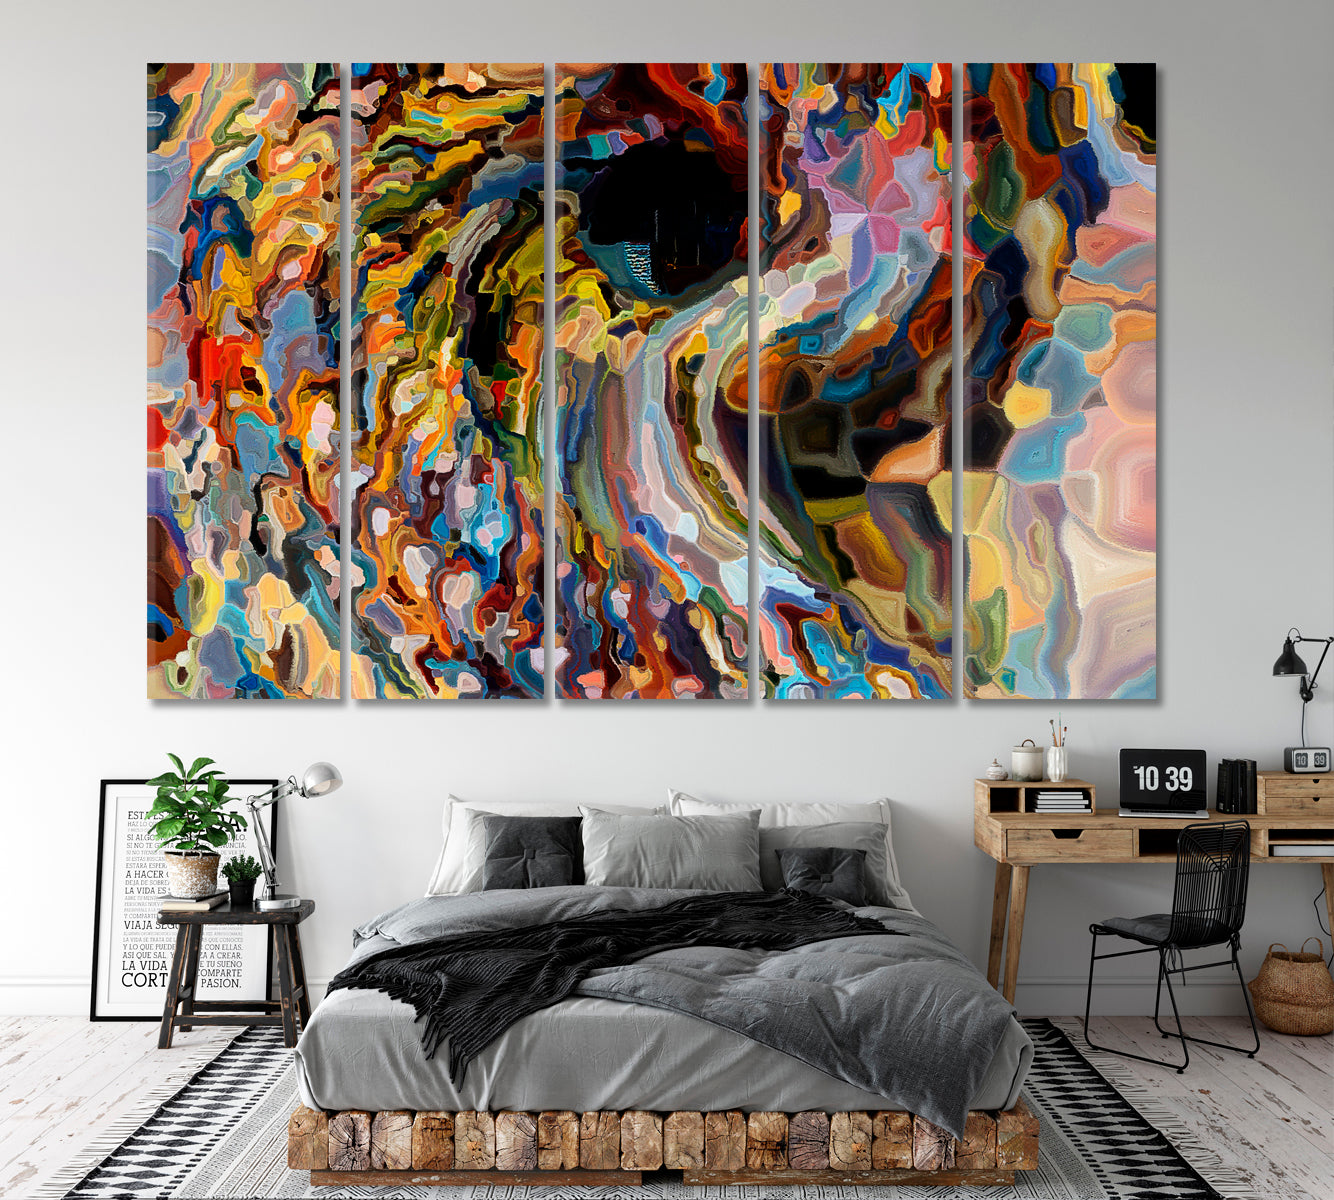 PAINTS VIRTUAL WHIRLPOOL  Unique Abstract Art Abstract Art Print Artesty 5 panels 36" x 24" 